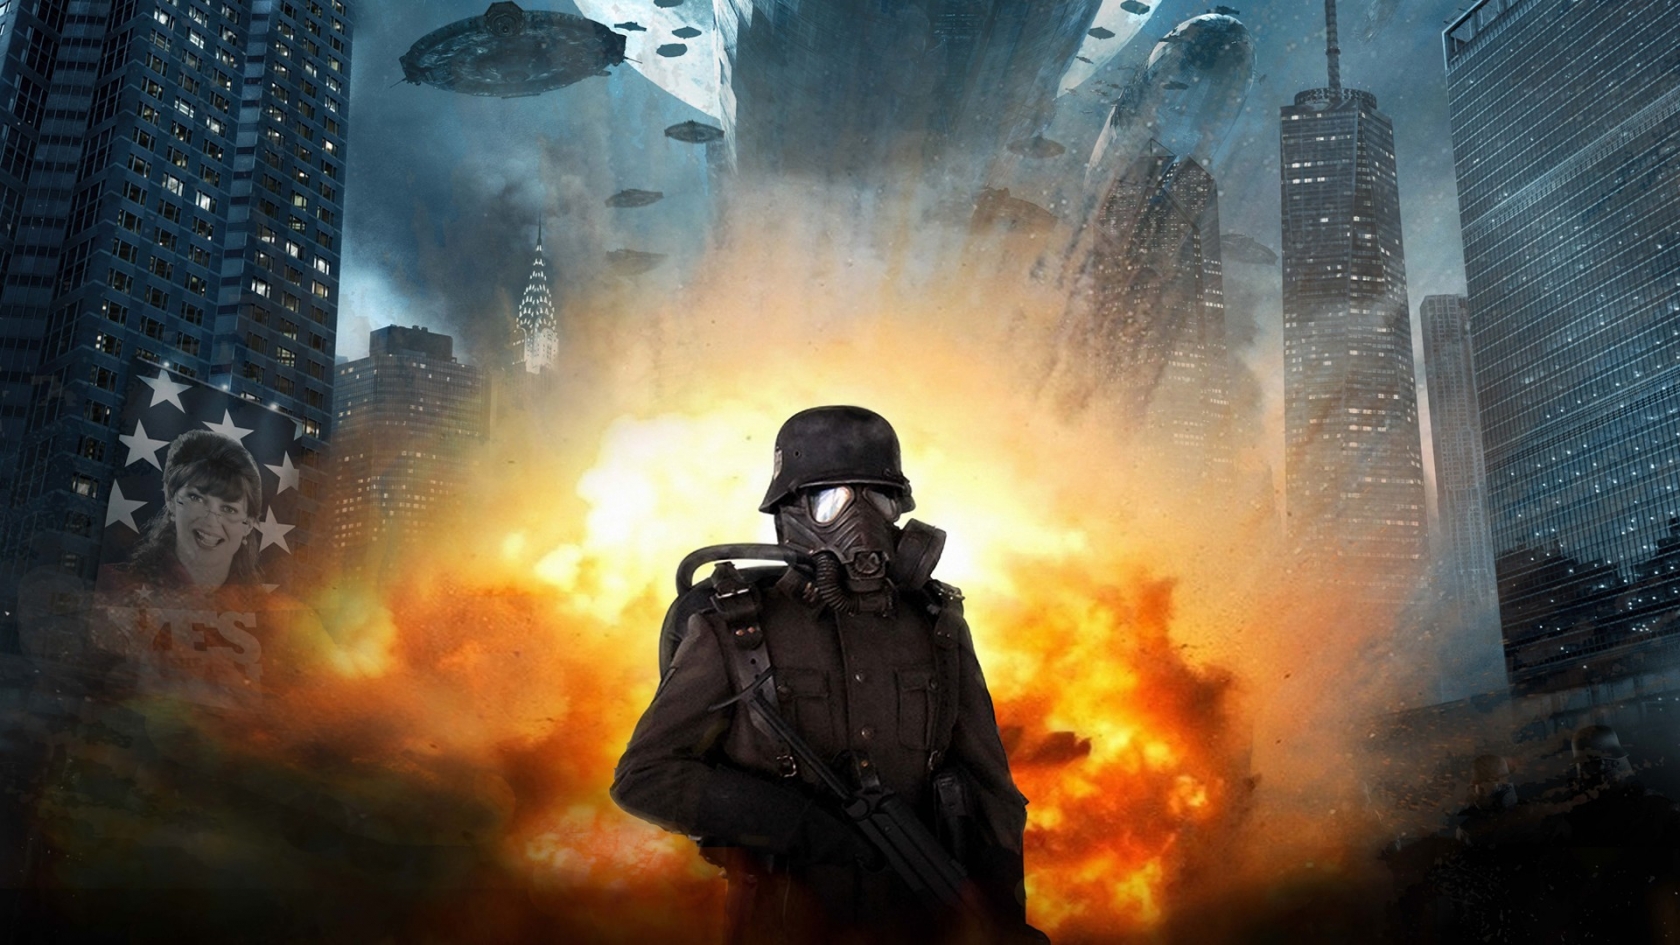 Iron Sky Soldier for 1680 x 945 HDTV resolution